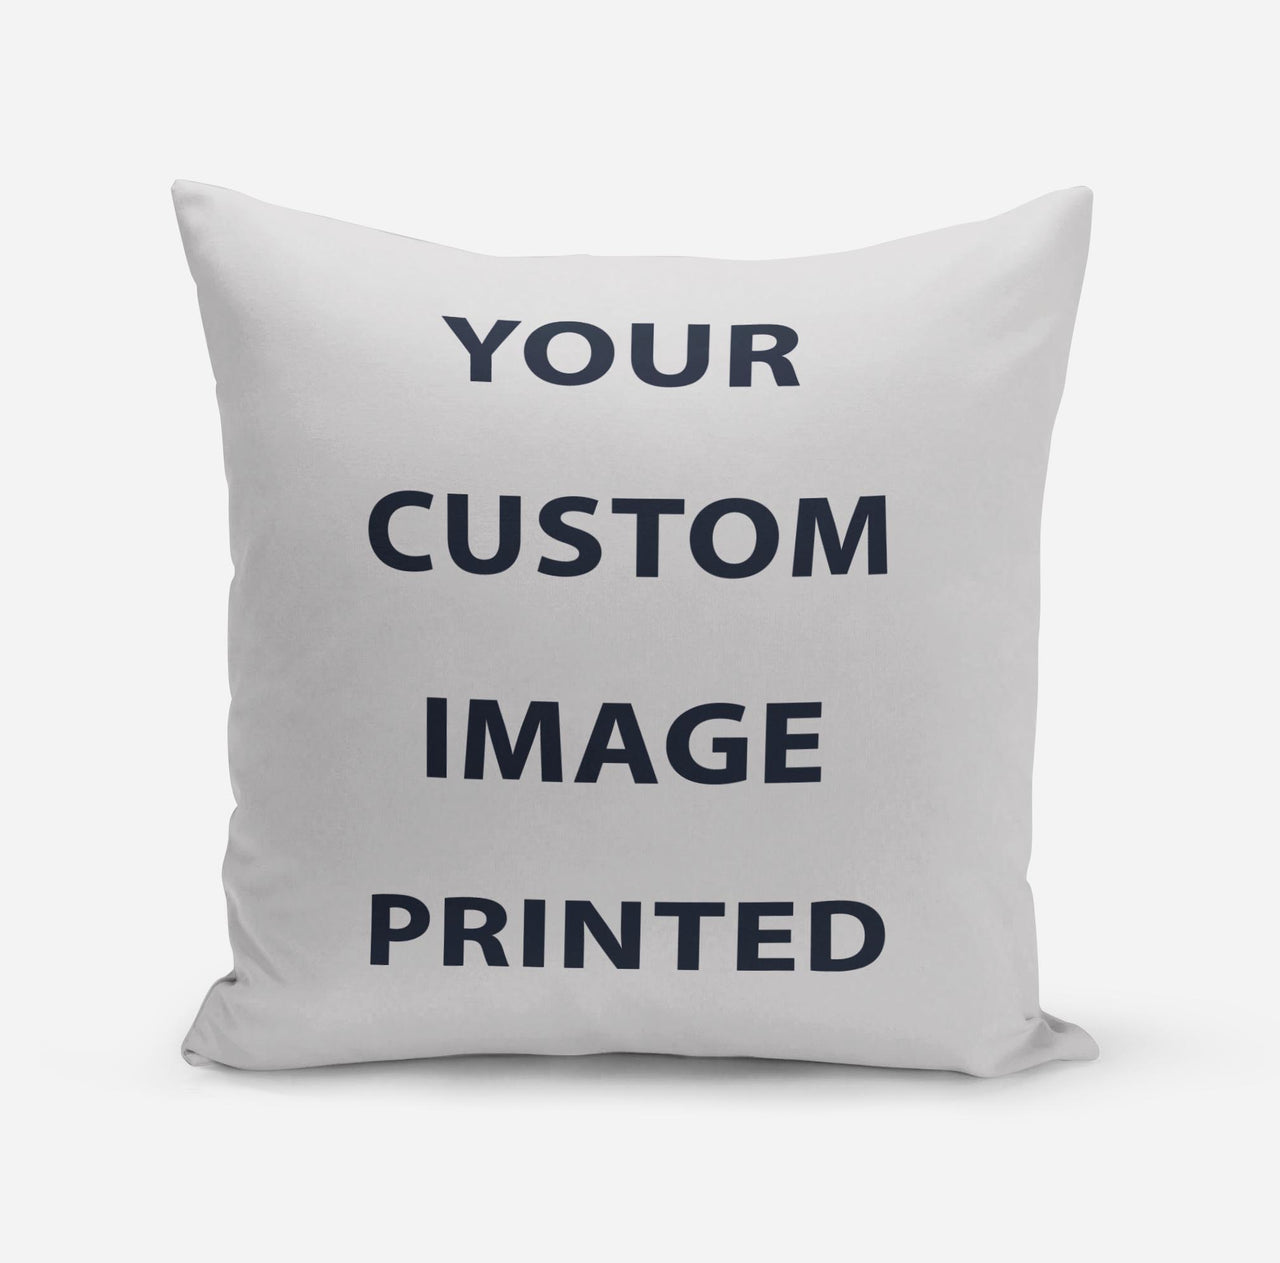 Your Custom Image Printed Pillows